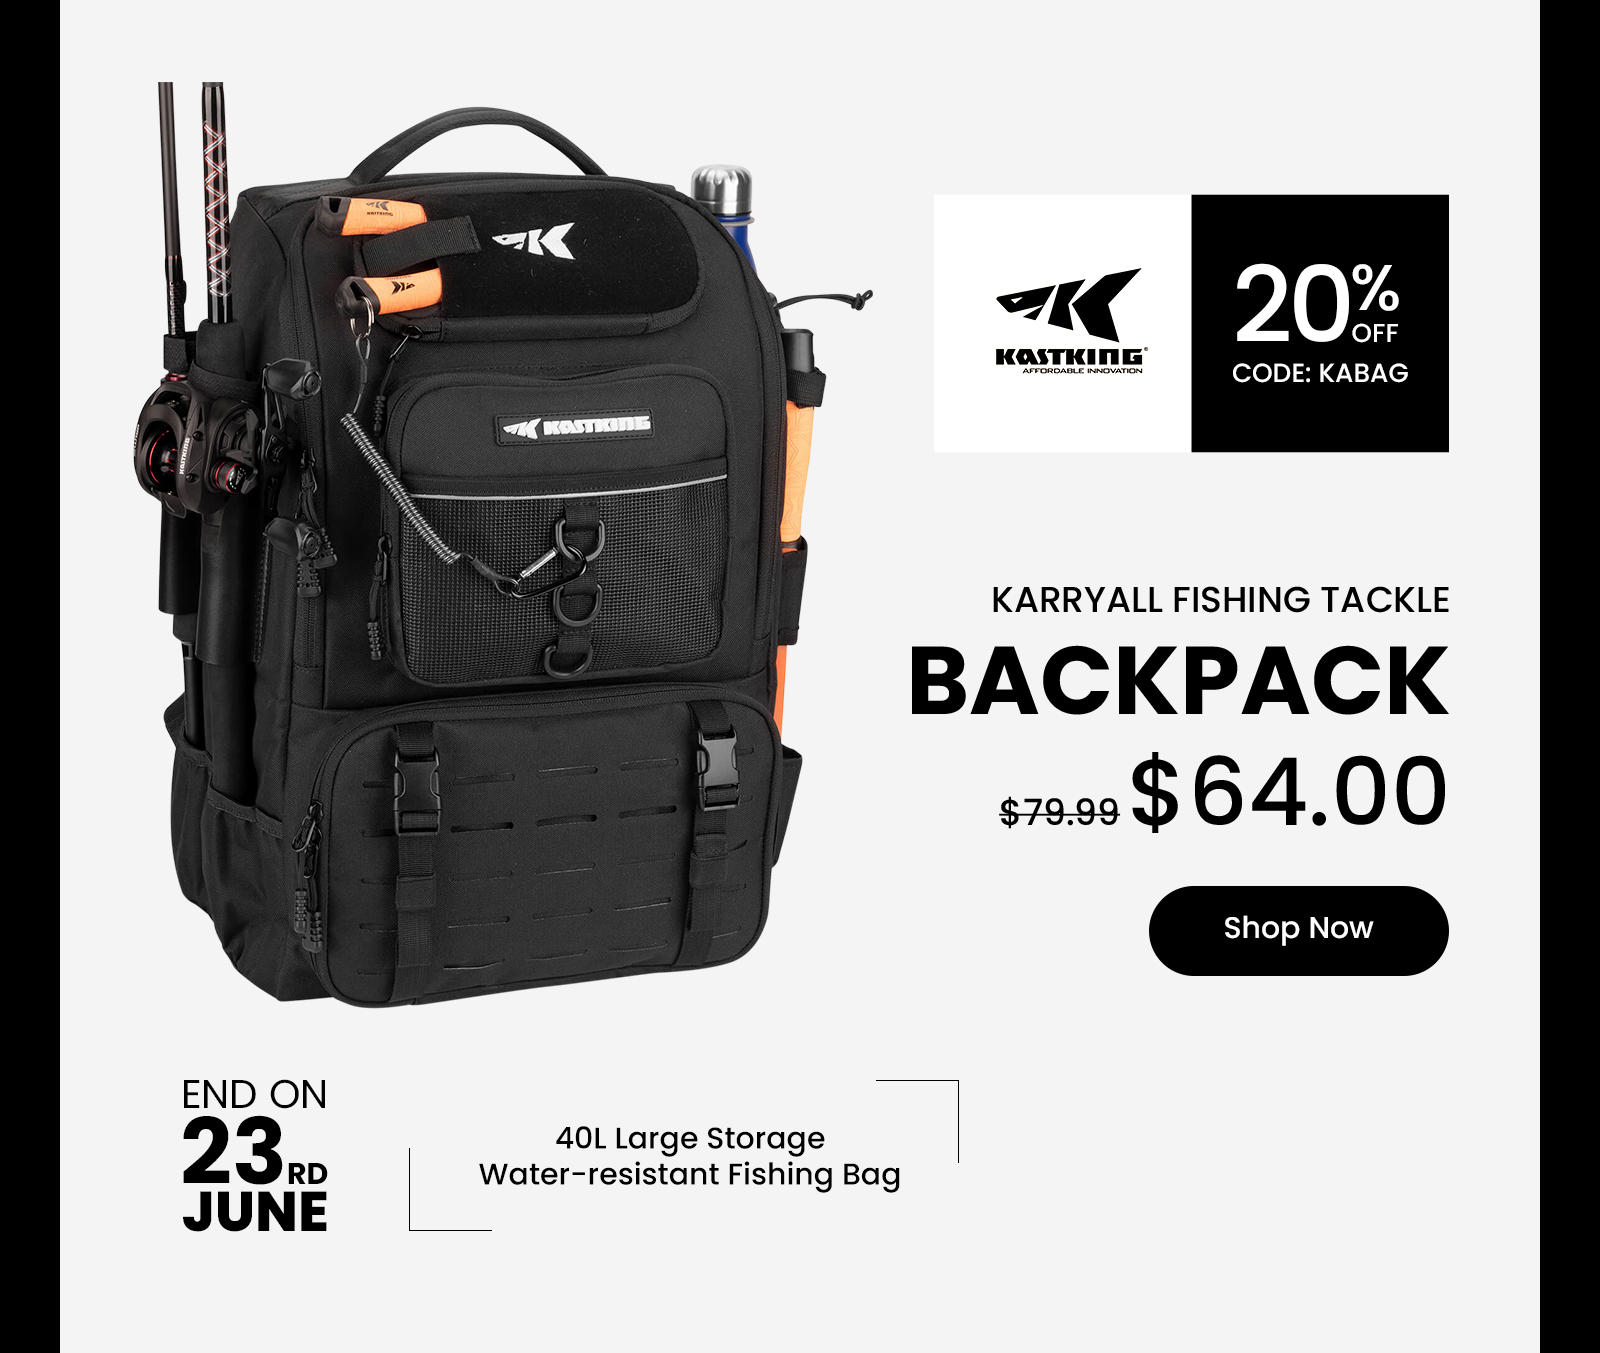 Manage All Your Gear - KastKing Karryall Fishing Tackle Backpack 20% Off  Now - KastKing